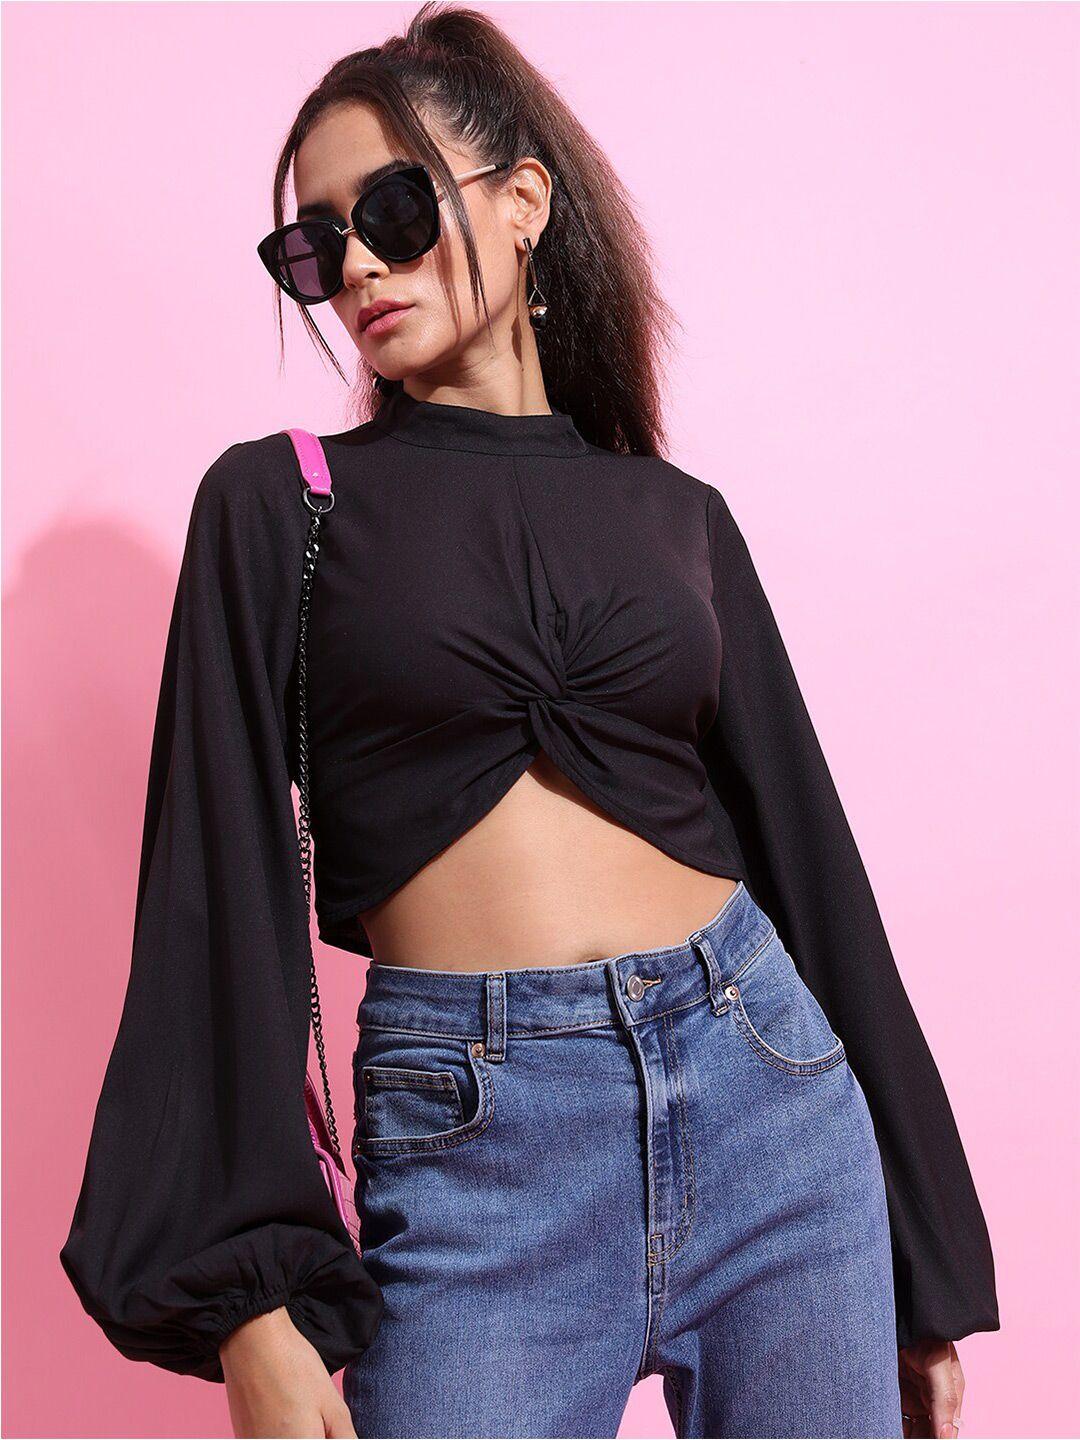 ketch styled back twisted crop top